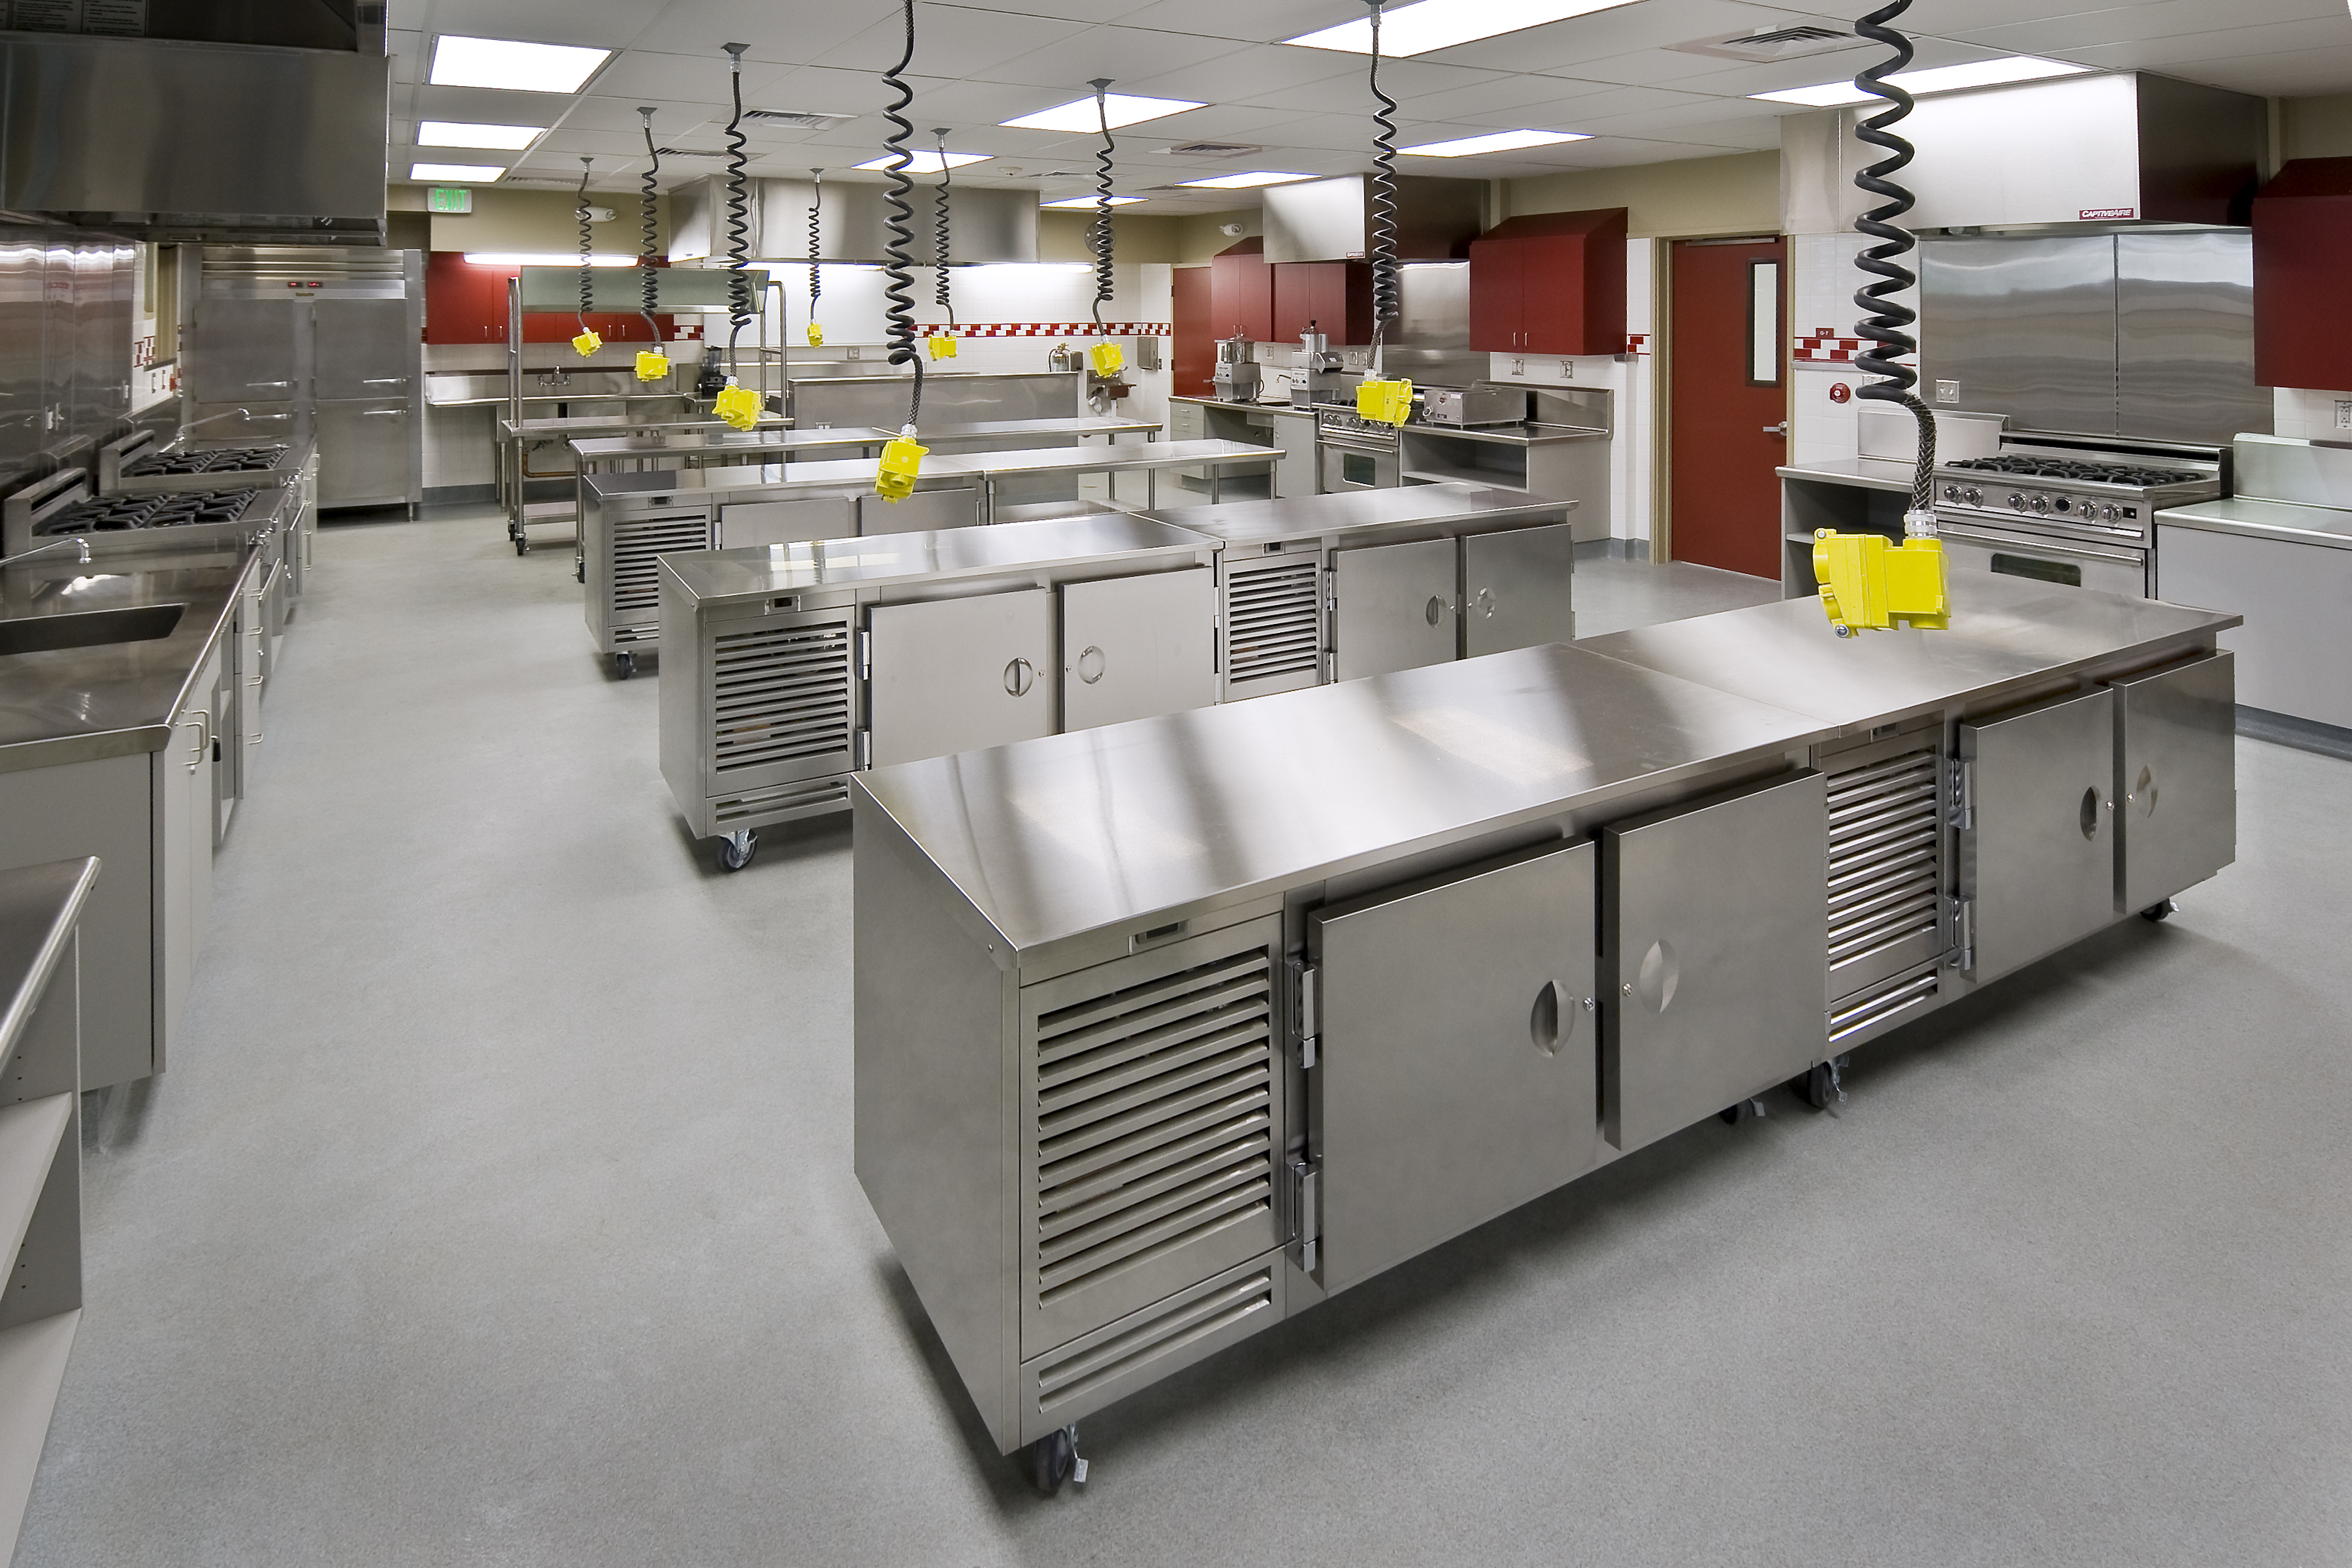 What are the demands on commercial kitchen floors?